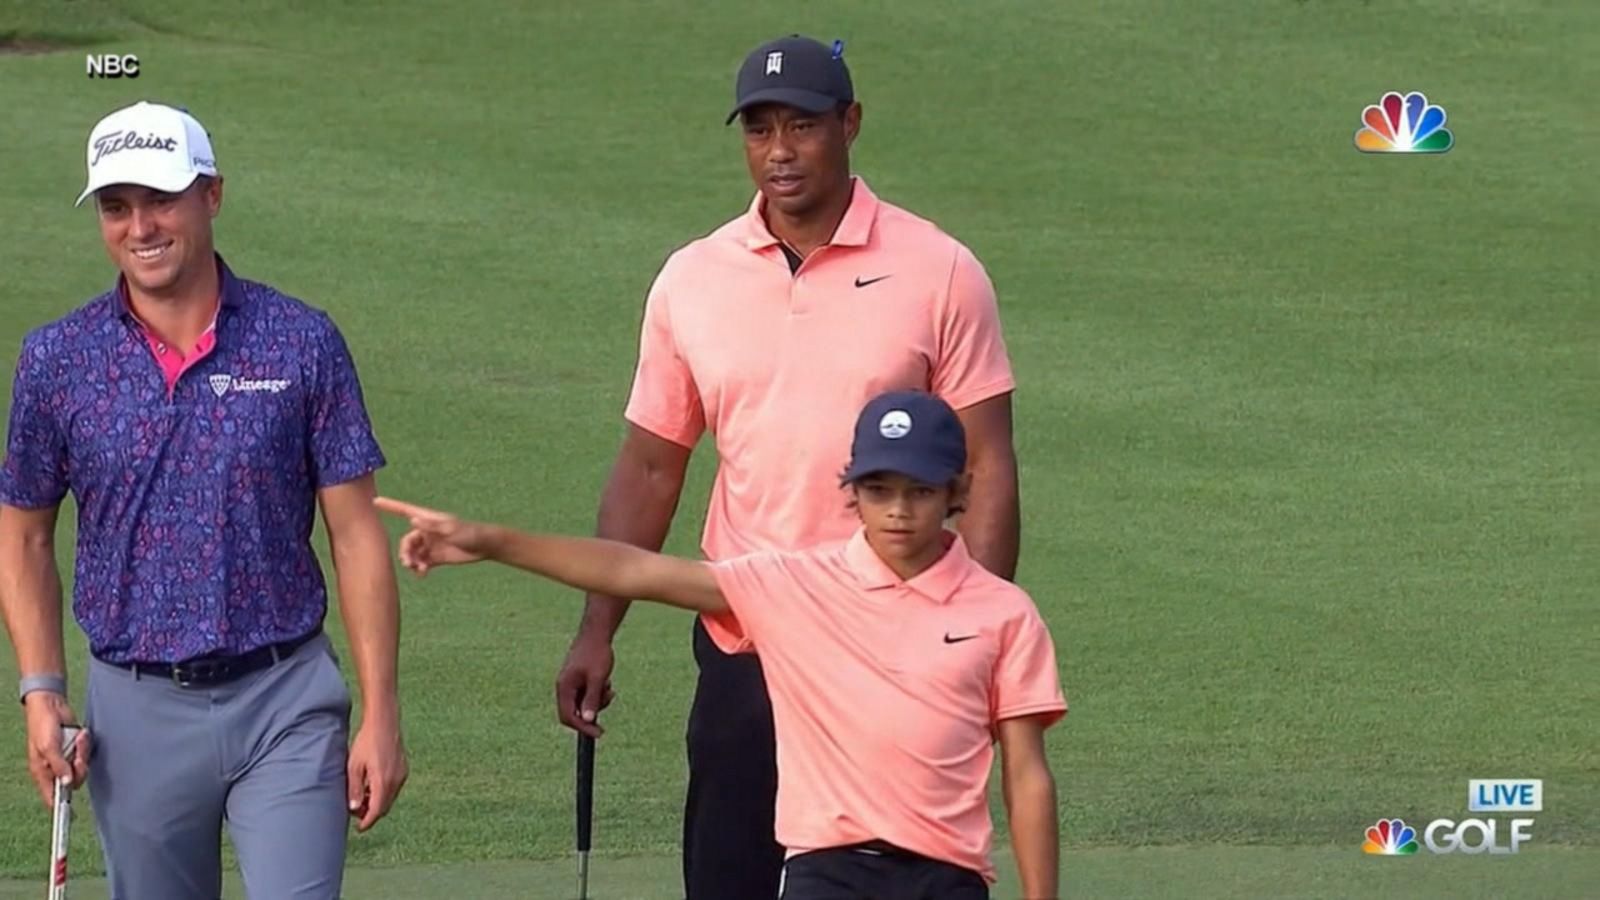 Tiger Woods and son Charlie compete at PNC Championship